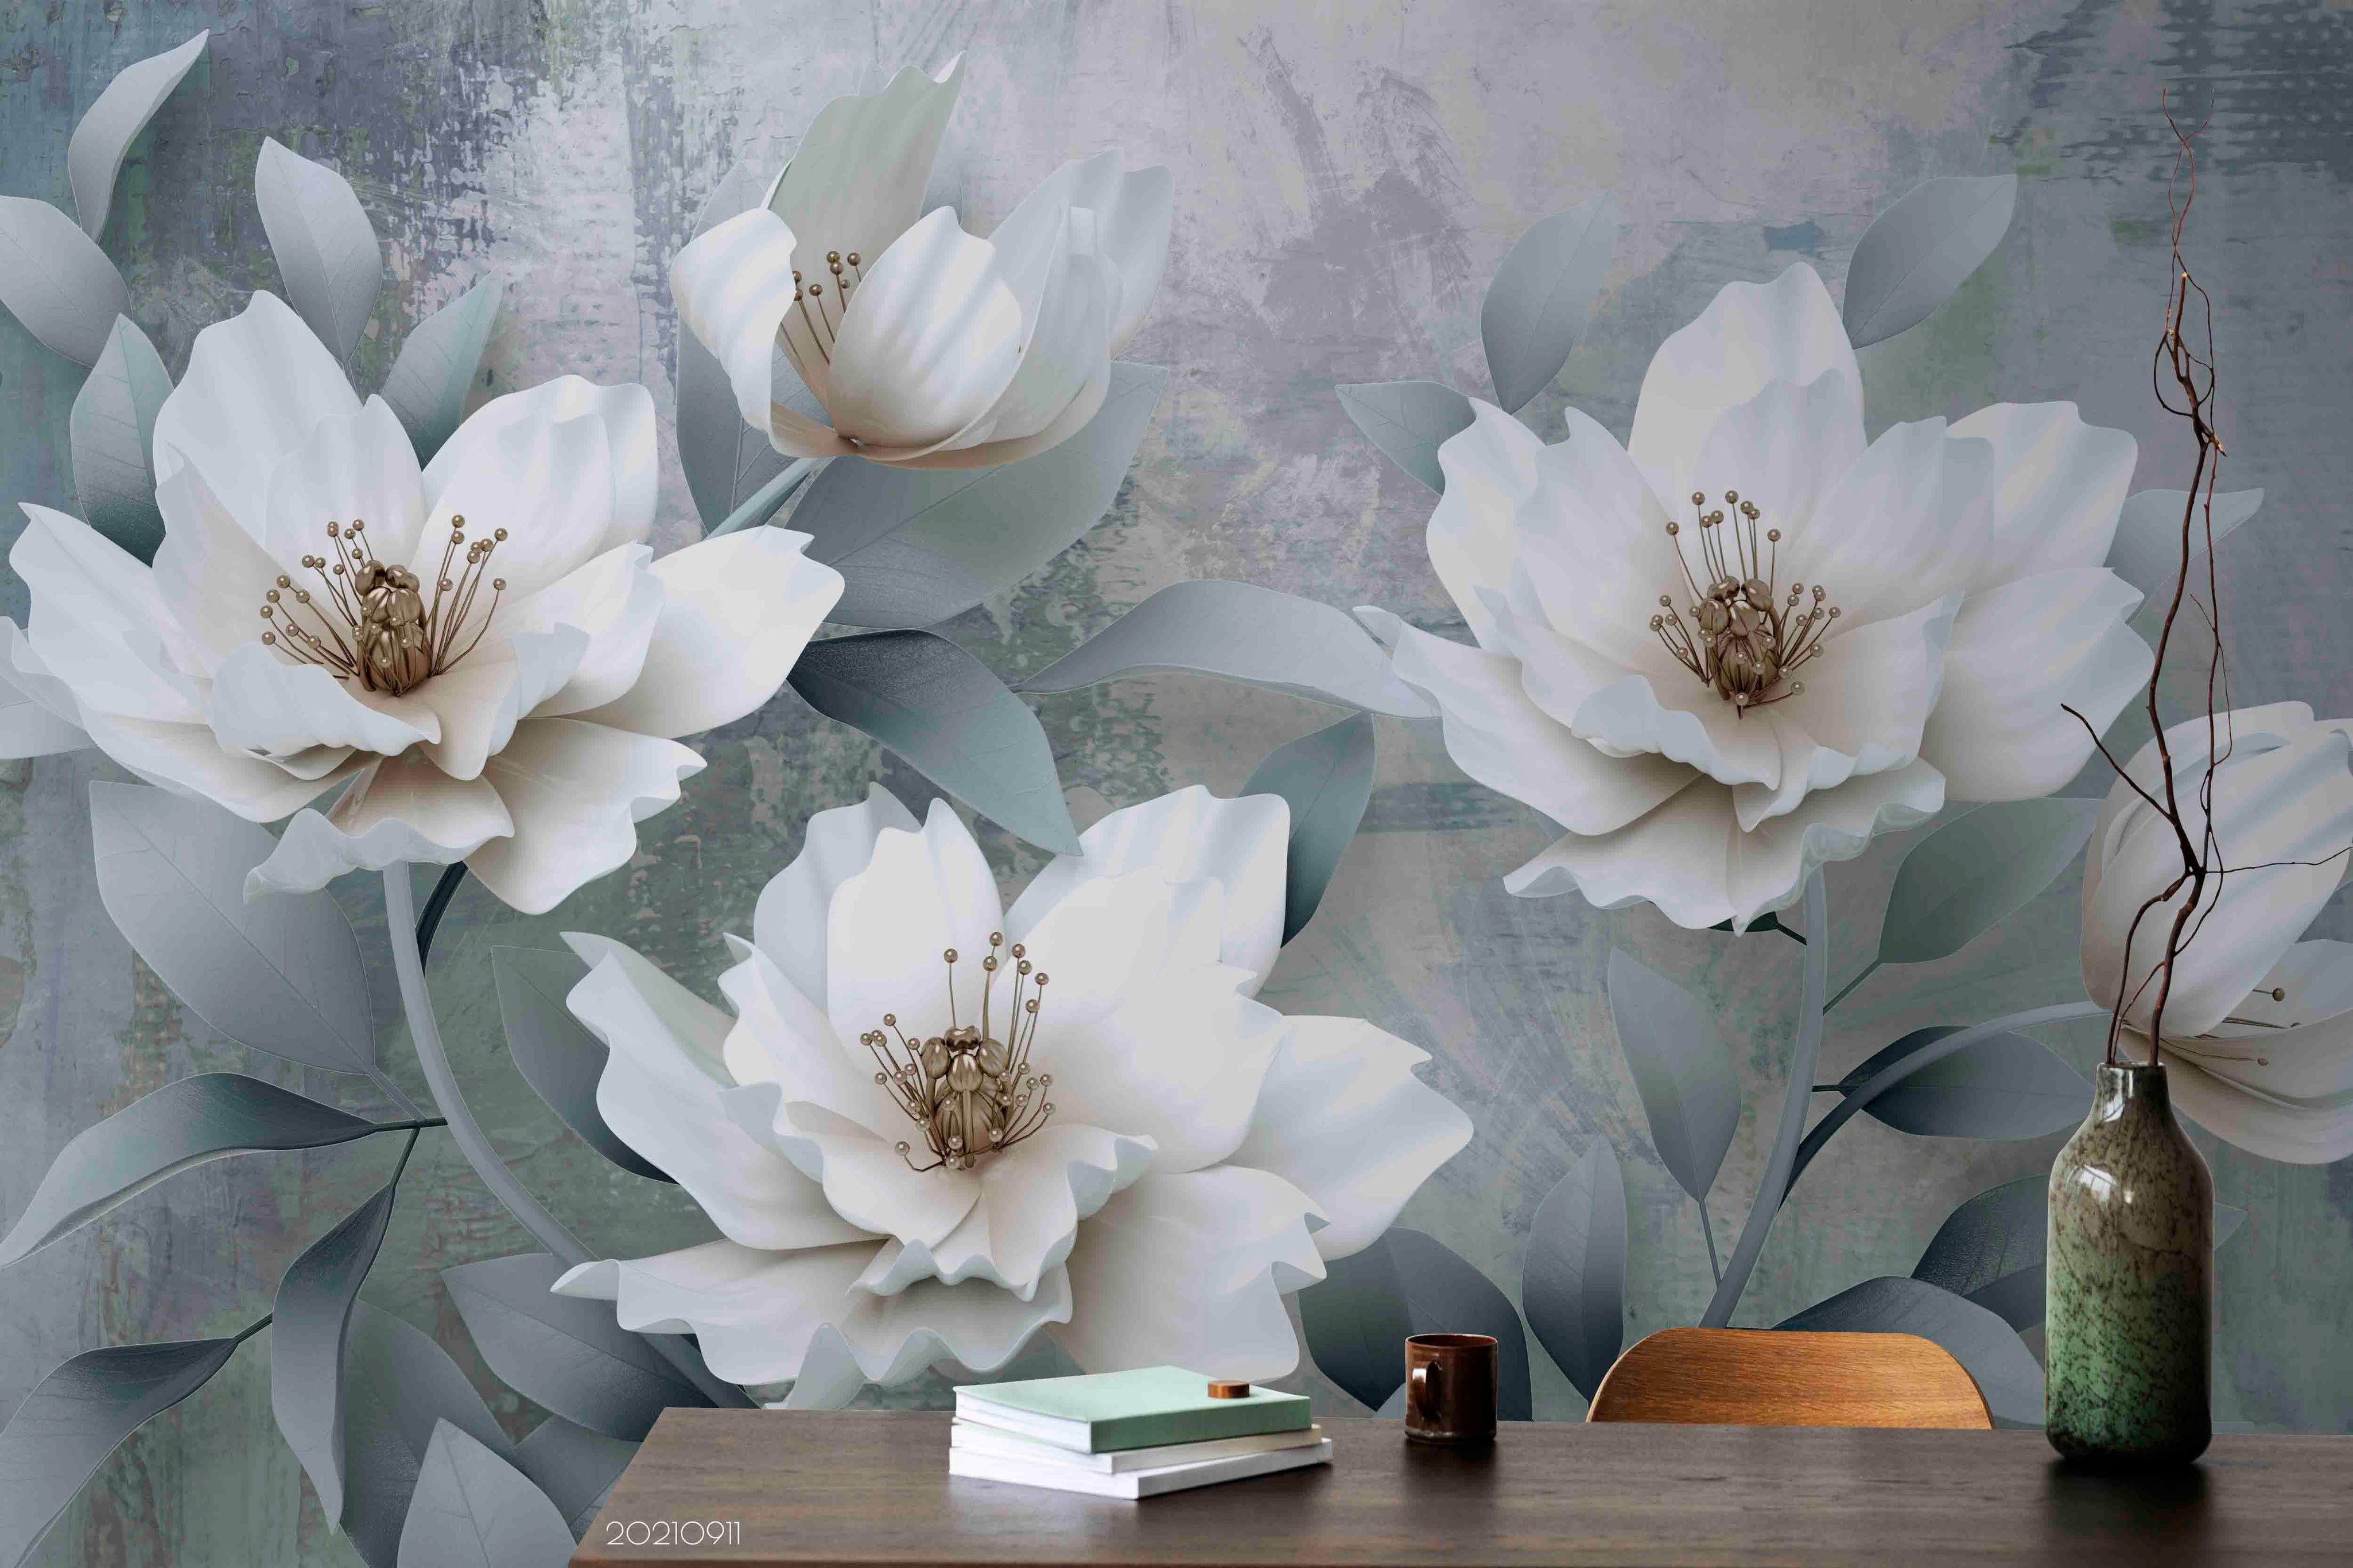 3D Hand Drawn Floral Leaves Wall Mural Wallpaper LQH 735- Jess Art Decoration